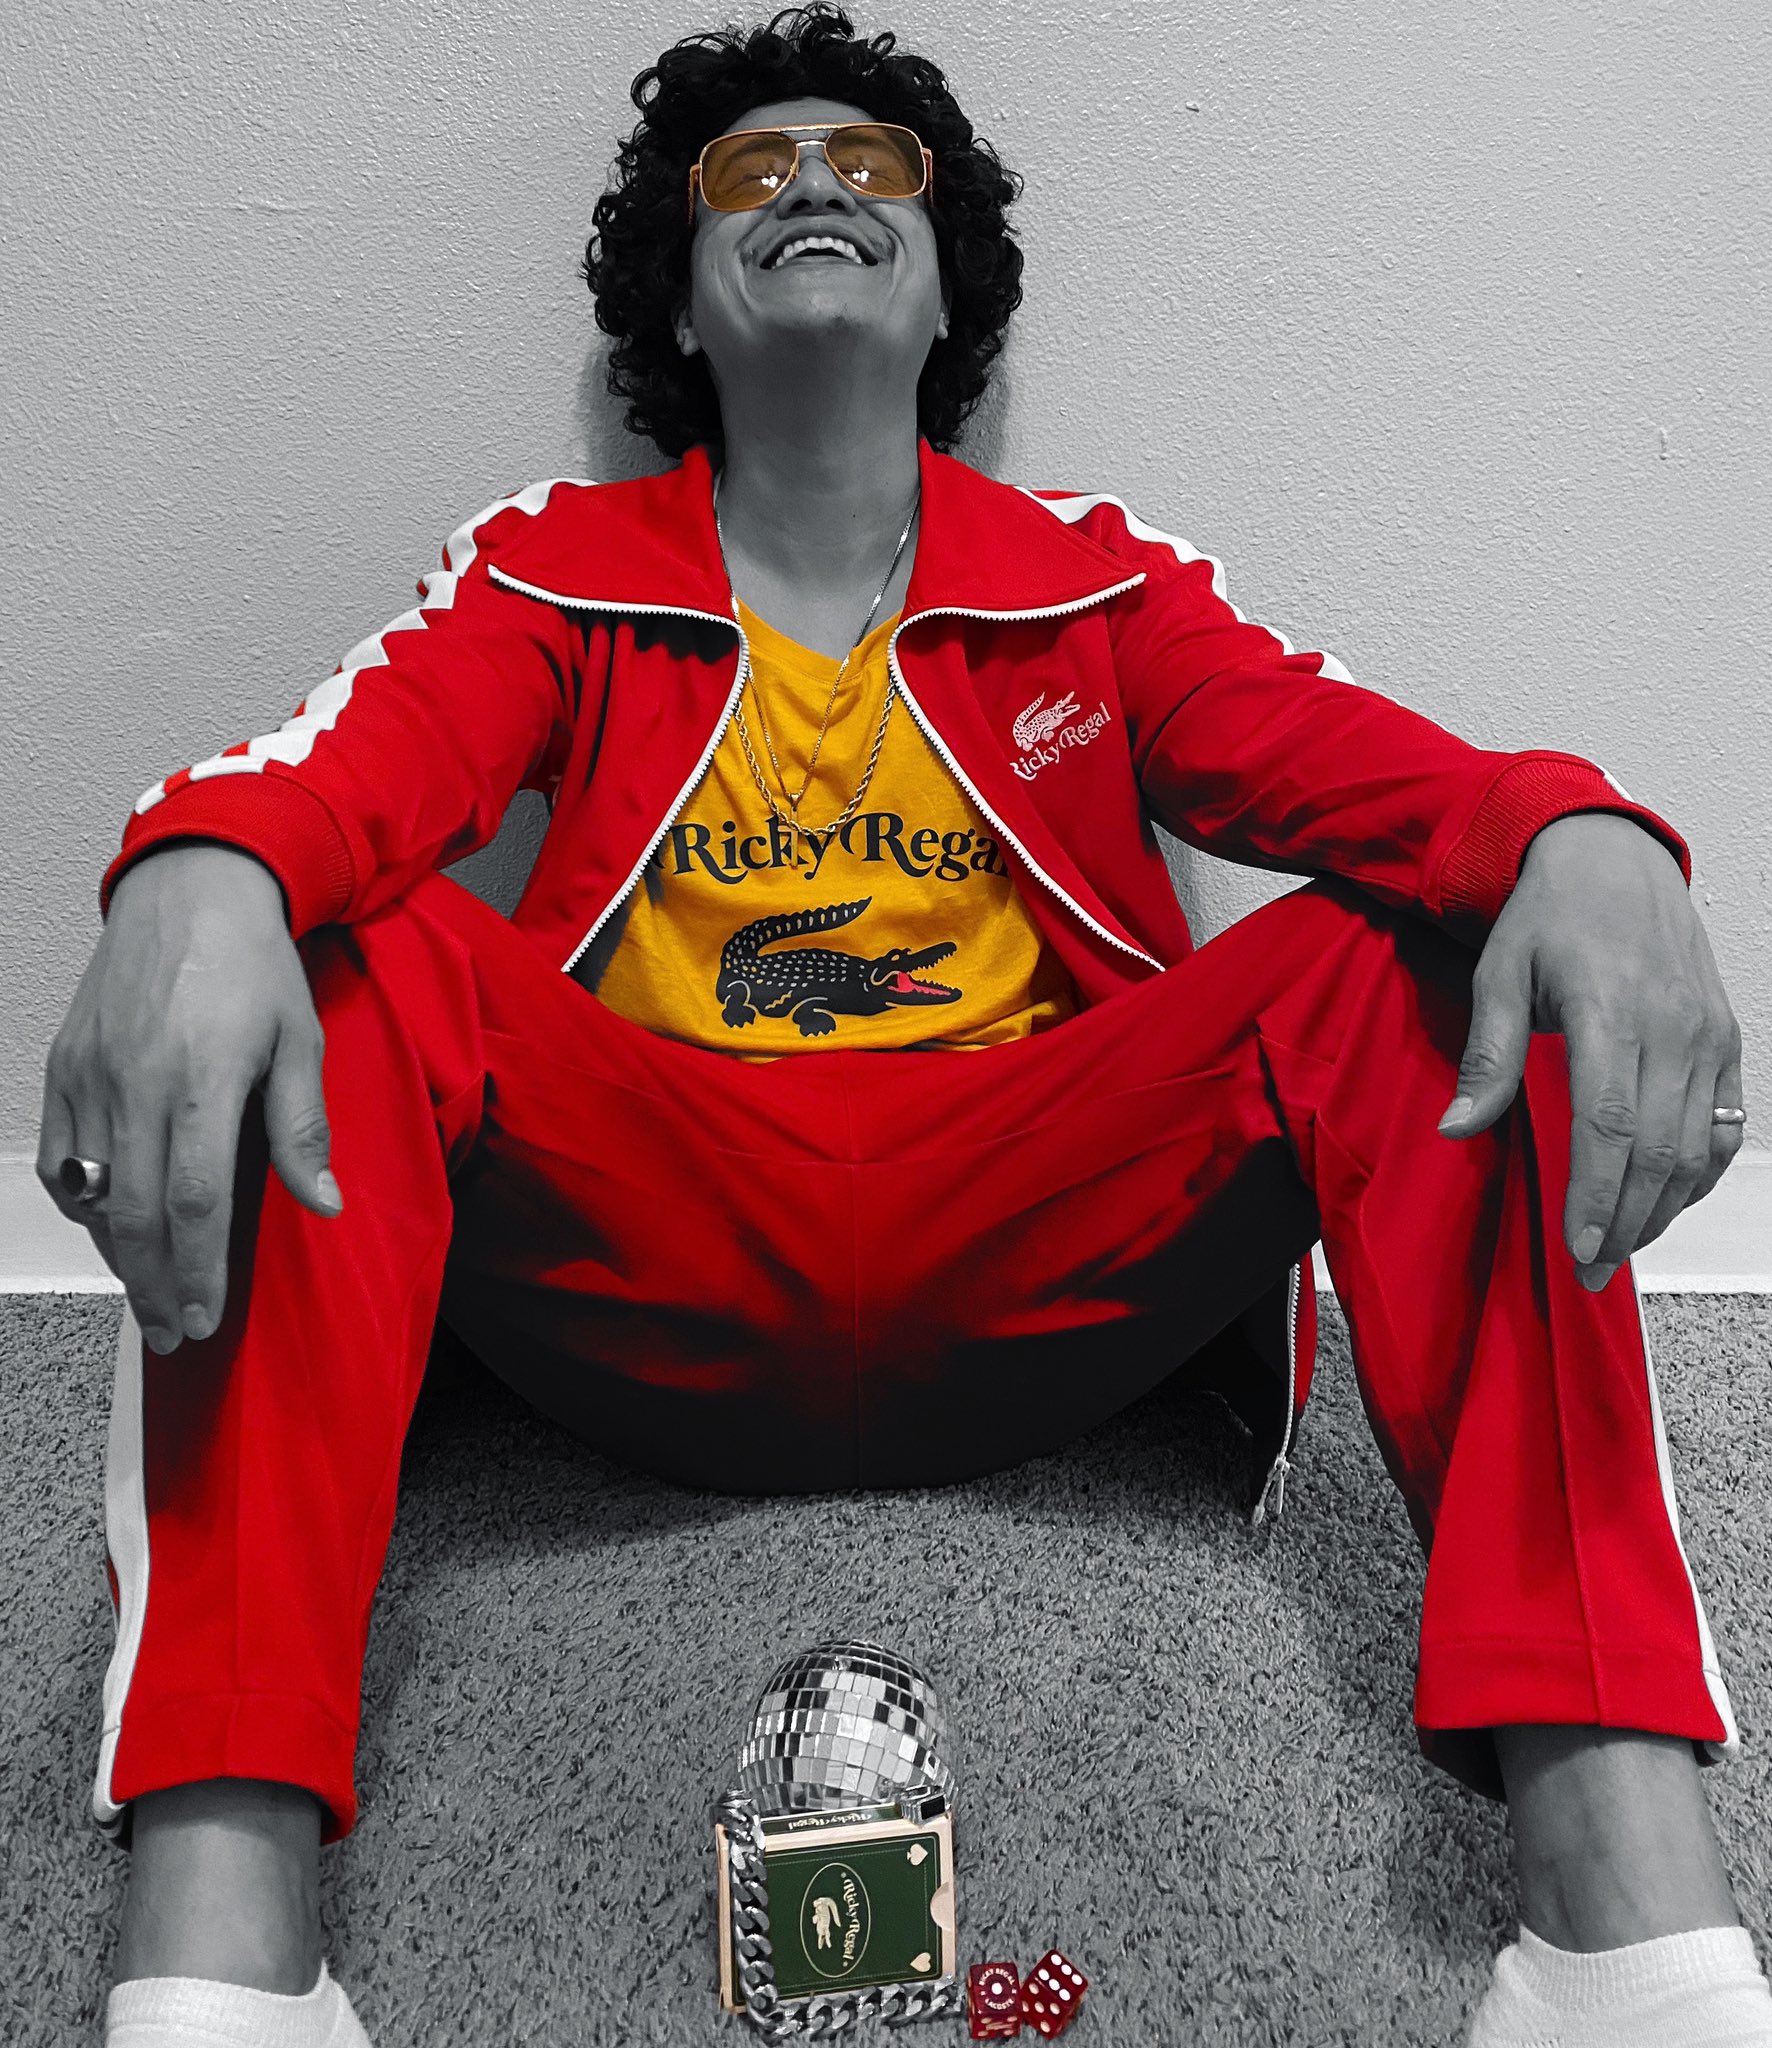 Bruno Mars Impersonator on Twitter: "Introducing Ricky Regal by Bruno Mars.  The collection brings the world of Ricky Regal to life through the lens of  Lacoste's iconic blend of sport and luxury. @